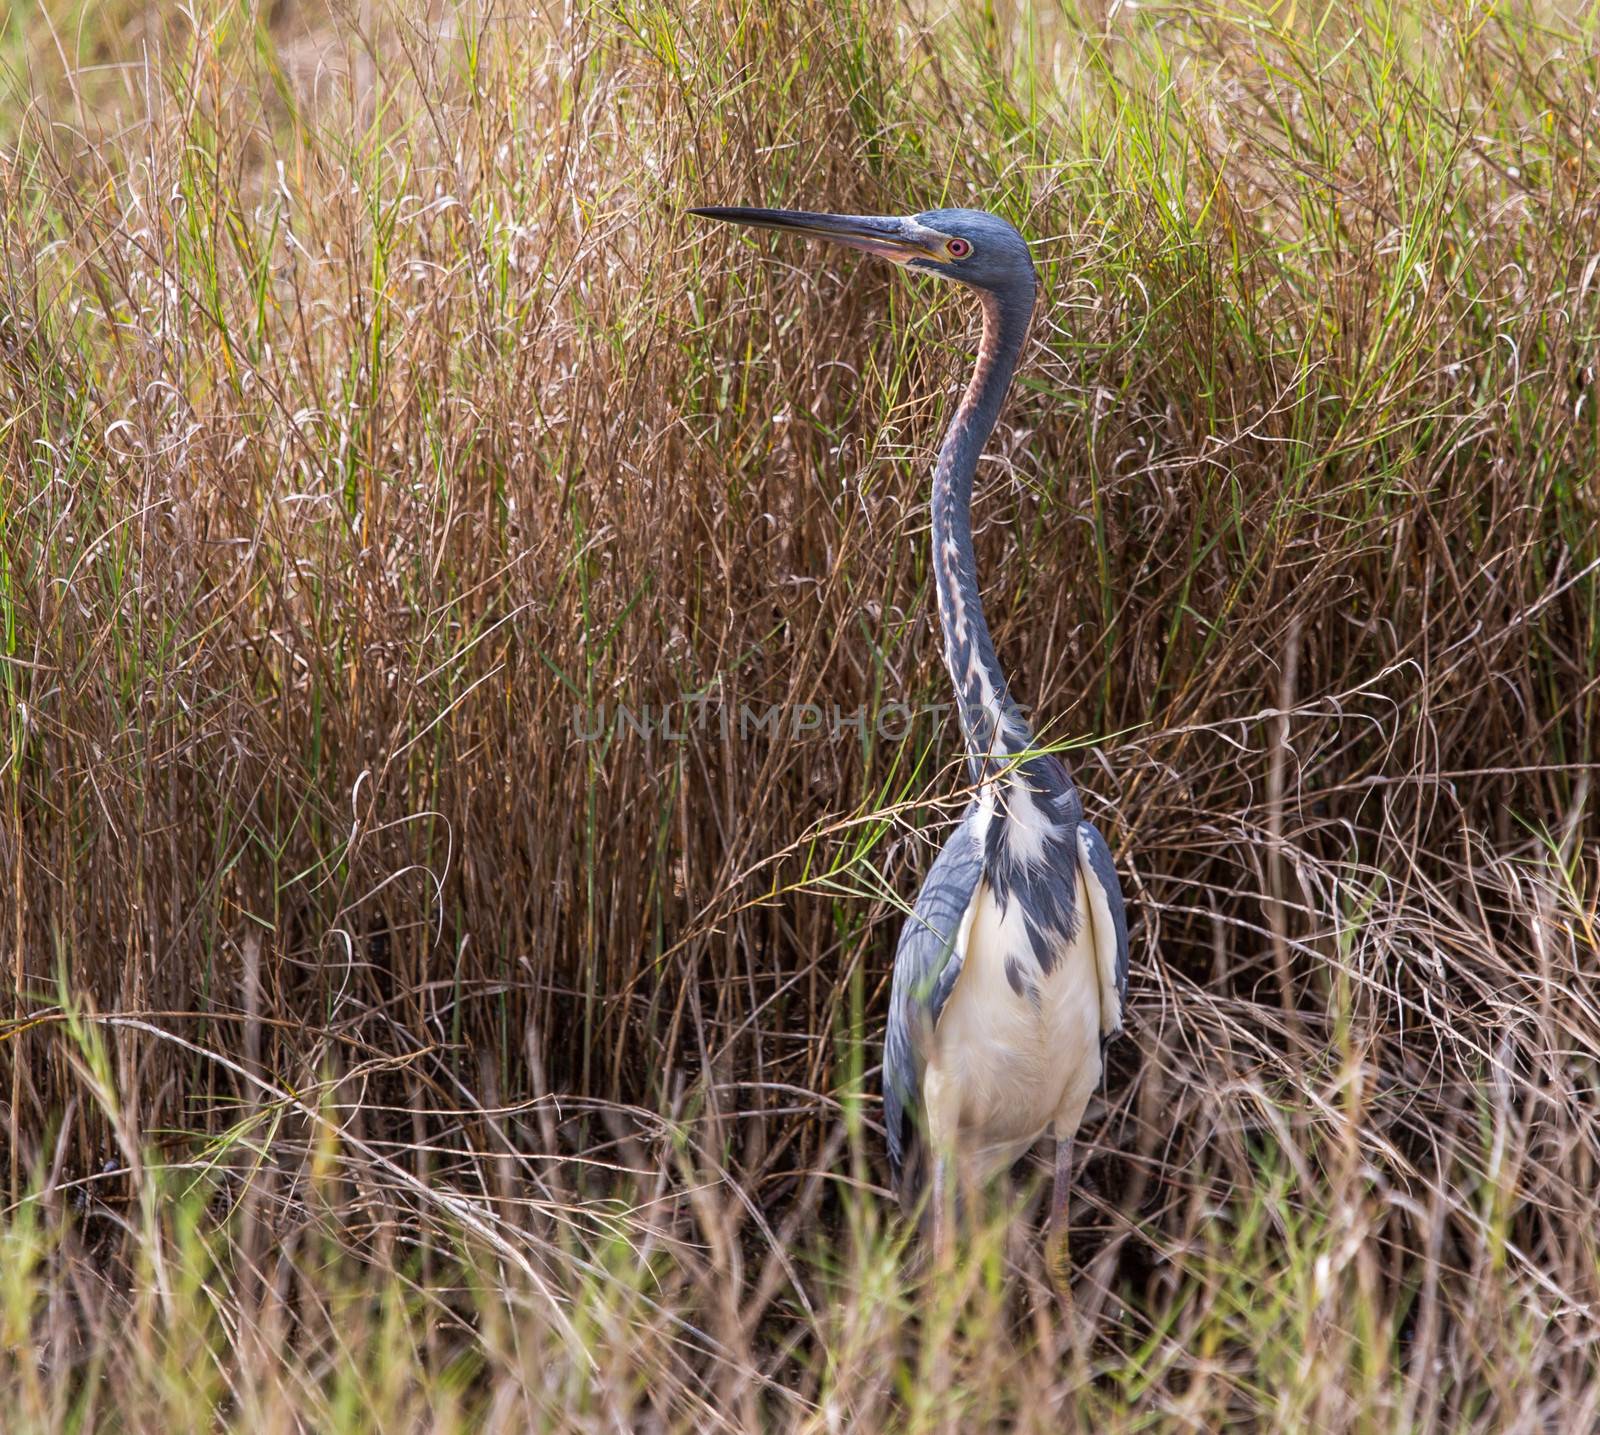 This beautiful Tri-colored Heron has his very flexible neck angled just so as he surveys the area.